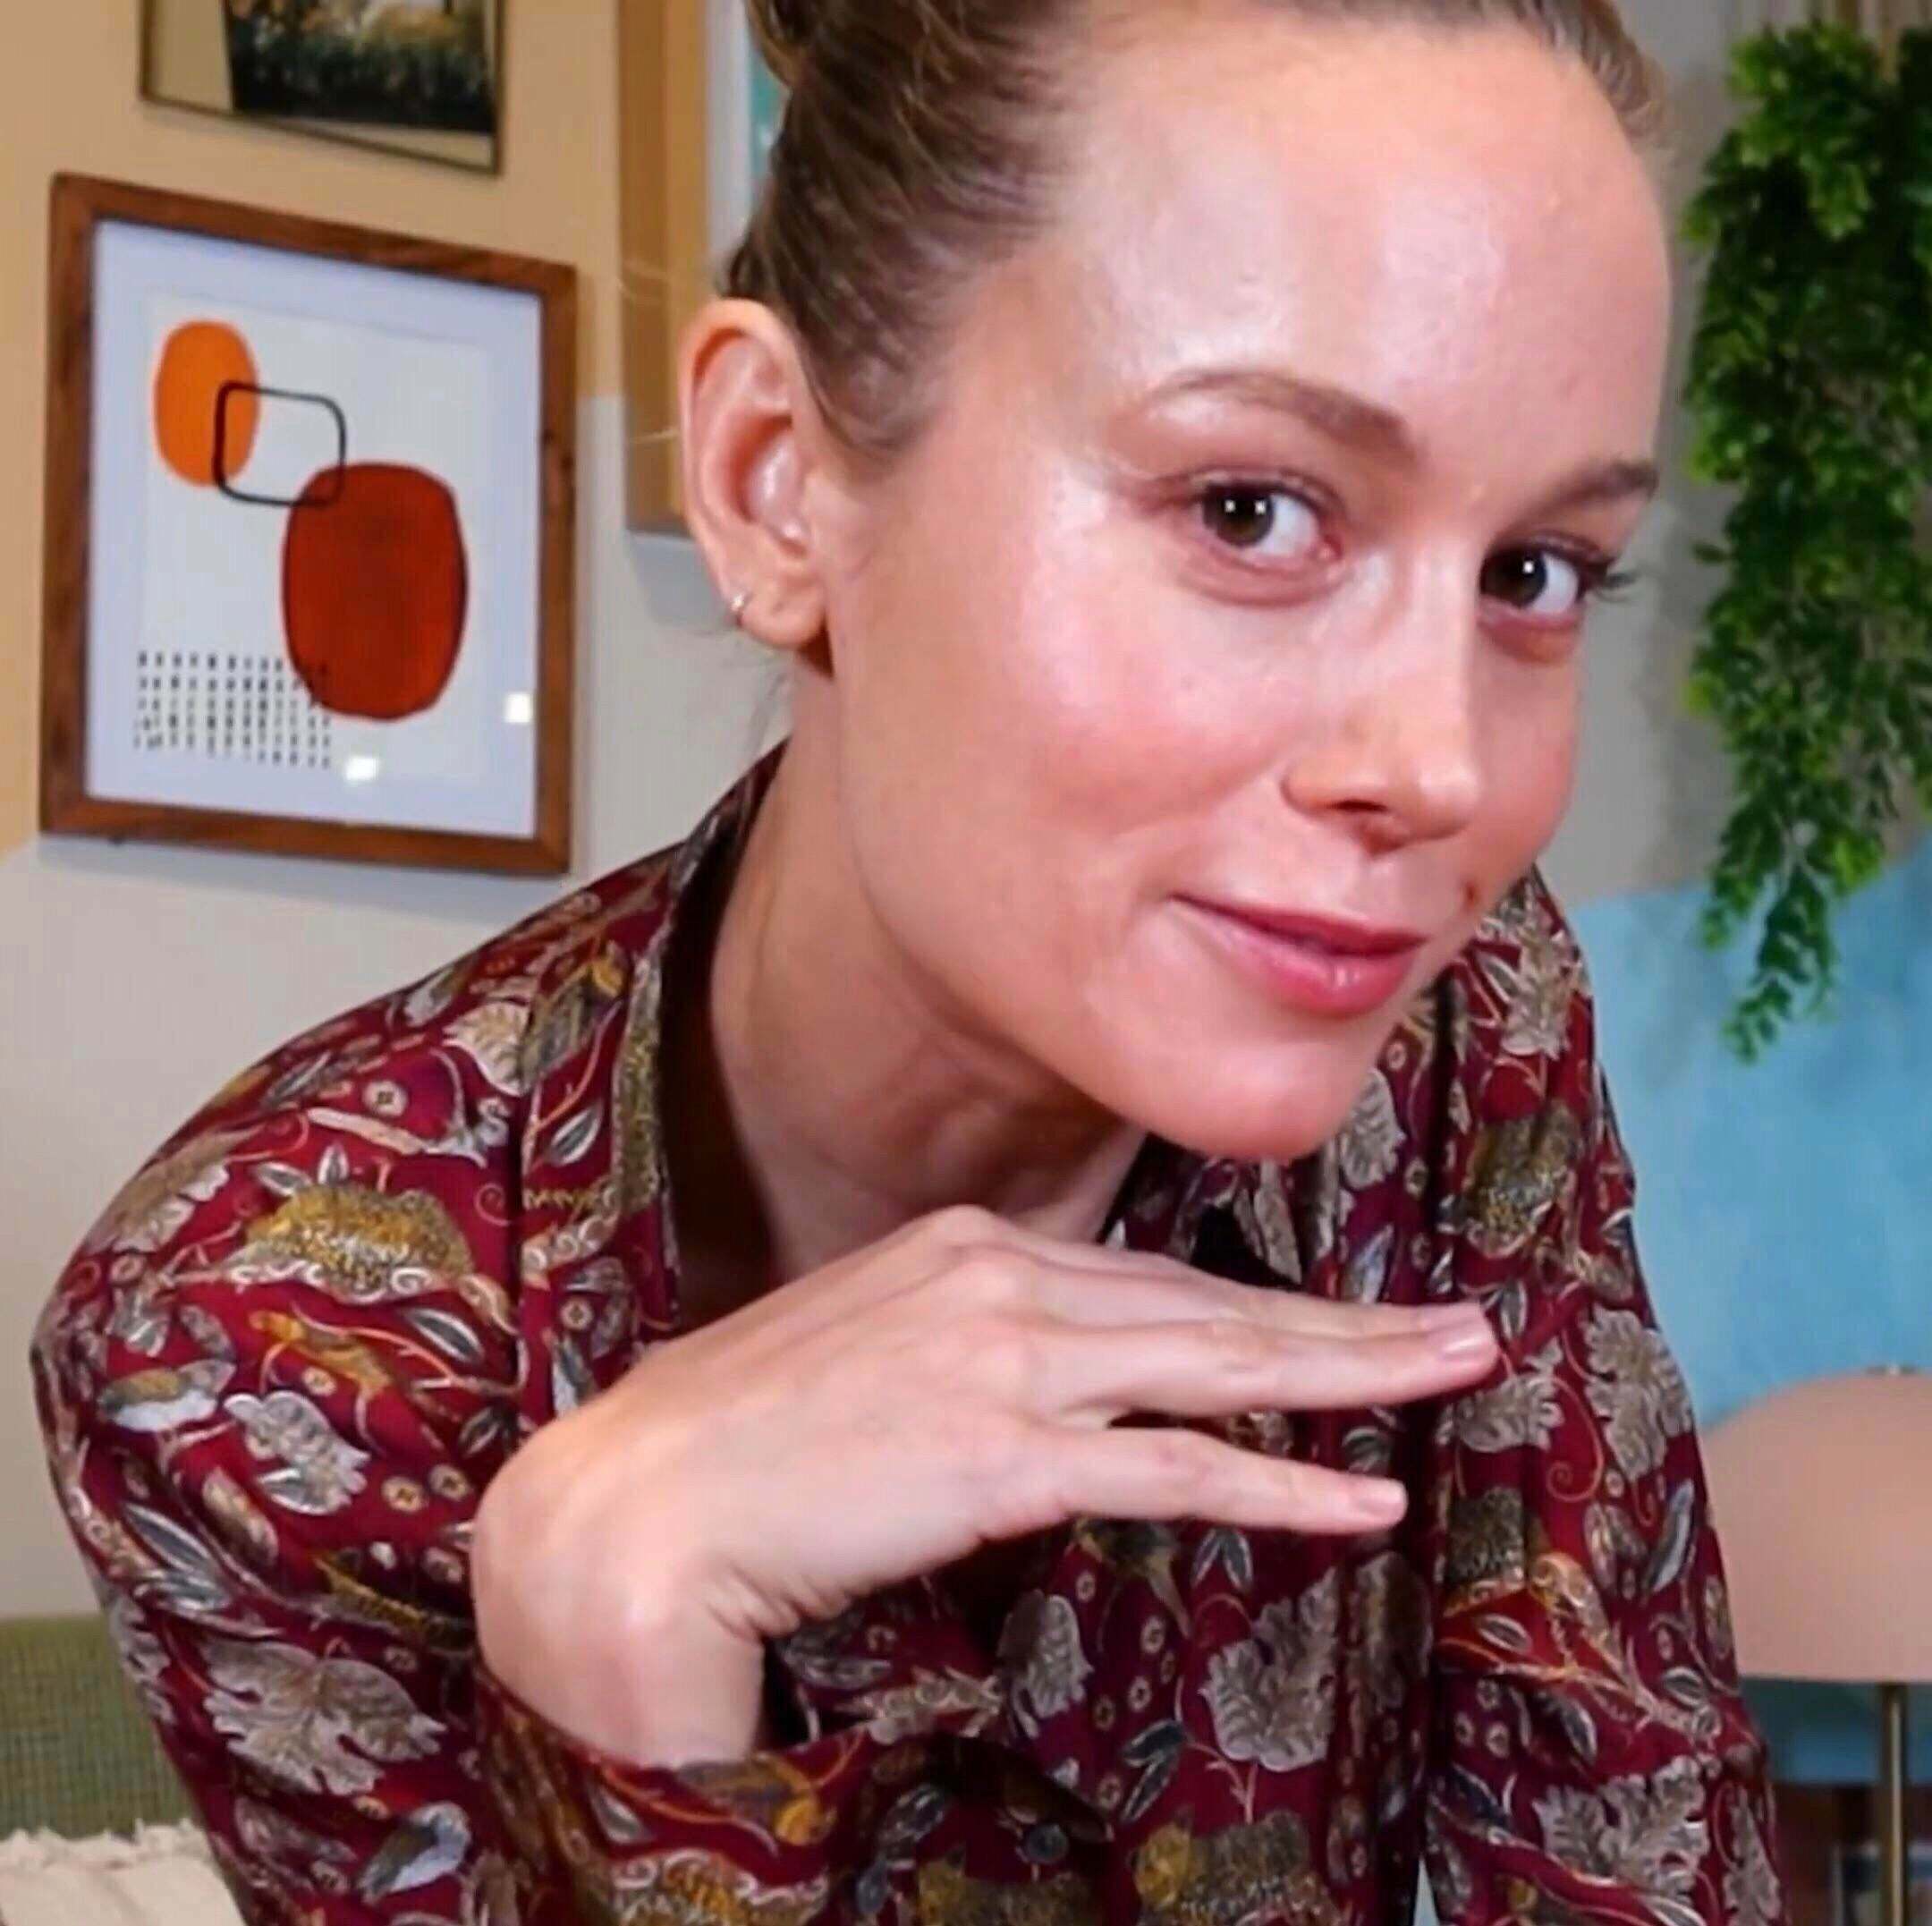 Brie Larson is ready for her facial